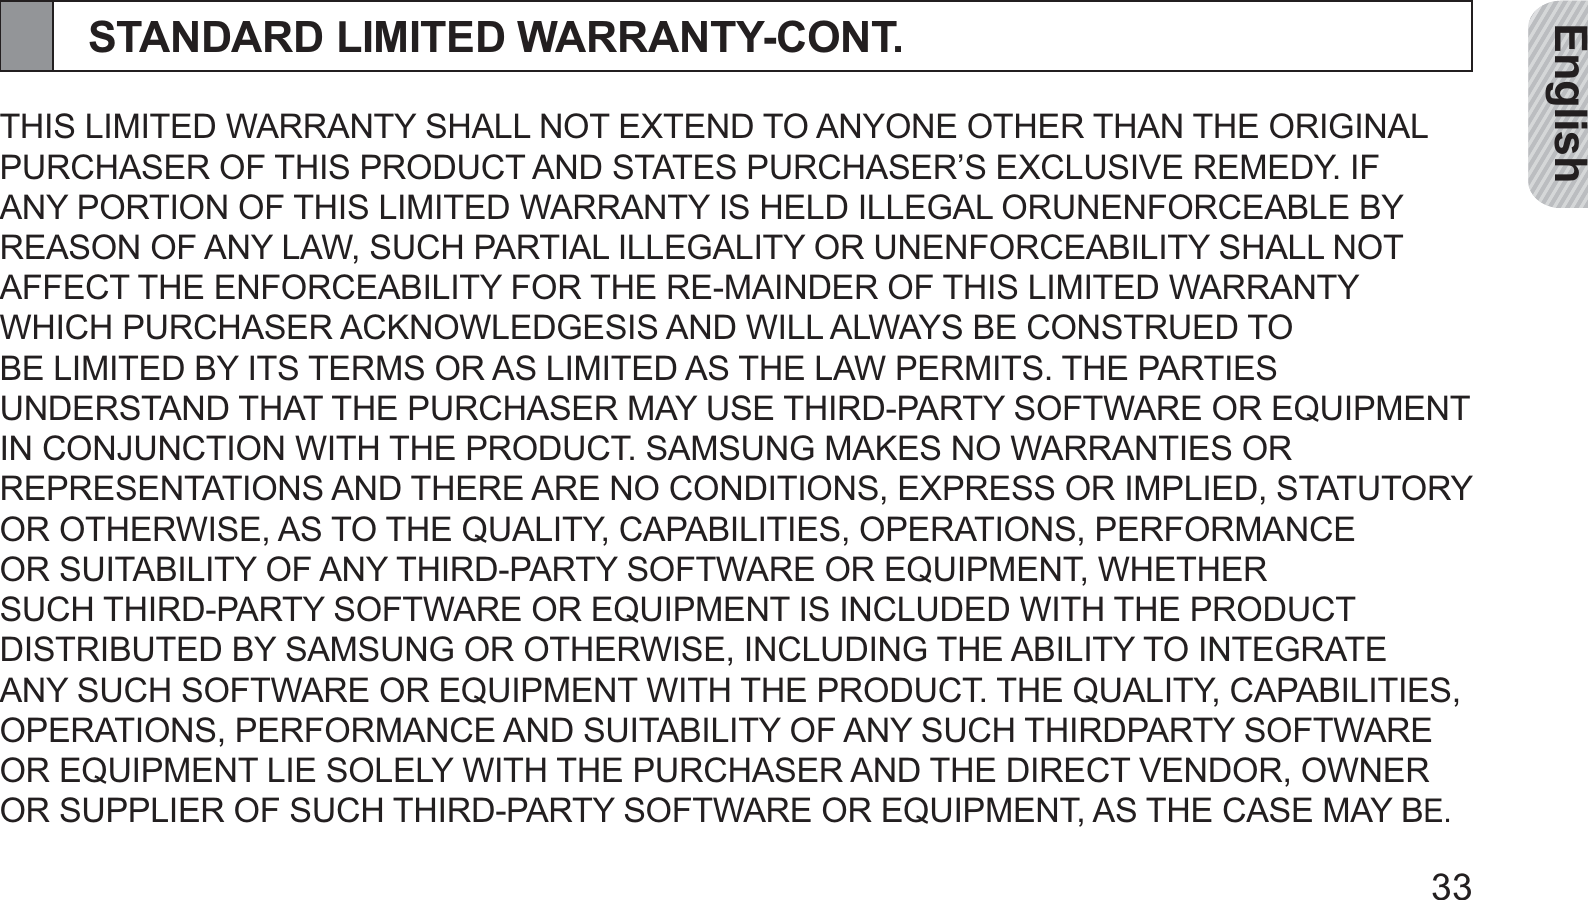 English33STANDARD LIMITED WARRANTY-CONT.THIS LIMITED WARRANTY SHALL NOT EXTEND TO ANYONE OTHER THAN THE ORIGINAL PURCHASER OF THIS PRODUCT AND STATES PURCHASER’S EXCLUSIVE REMEDY. IF ANY PORTION OF THIS LIMITED WARRANTY IS HELD ILLEGAL ORUNENFORCEABLE BY REASON OF ANY LAW, SUCH PARTIAL ILLEGALITY OR UNENFORCEABILITY SHALL NOT AFFECT THE ENFORCEABILITY FOR THE RE-MAINDER OF THIS LIMITED WARRANTY WHICH PURCHASER ACKNOWLEDGESIS AND WILL ALWAYS BE CONSTRUED TO BE LIMITED BY ITS TERMS OR AS LIMITED AS THE LAW PERMITS. THE PARTIES UNDERSTAND THAT THE PURCHASER MAY USE THIRD-PARTY SOFTWARE OR EQUIPMENT IN CONJUNCTION WITH THE PRODUCT. SAMSUNG MAKES NO WARRANTIES OR REPRESENTATIONS AND THERE ARE NO CONDITIONS, EXPRESS OR IMPLIED, STATUTORY OR OTHERWISE, AS TO THE QUALITY, CAPABILITIES, OPERATIONS, PERFORMANCE OR SUITABILITY OF ANY THIRD-PARTY SOFTWARE OR EQUIPMENT, WHETHER SUCH THIRD-PARTY SOFTWARE OR EQUIPMENT IS INCLUDED WITH THE PRODUCT DISTRIBUTED BY SAMSUNG OR OTHERWISE, INCLUDING THE ABILITY TO INTEGRATE ANY SUCH SOFTWARE OR EQUIPMENT WITH THE PRODUCT. THE QUALITY, CAPABILITIES, OPERATIONS, PERFORMANCE AND SUITABILITY OF ANY SUCH THIRDPARTY SOFTWARE OR EQUIPMENT LIE SOLELY WITH THE PURCHASER AND THE DIRECT VENDOR, OWNER OR SUPPLIER OF SUCH THIRD-PARTY SOFTWARE OR EQUIPMENT, AS THE CASE MAY BE.